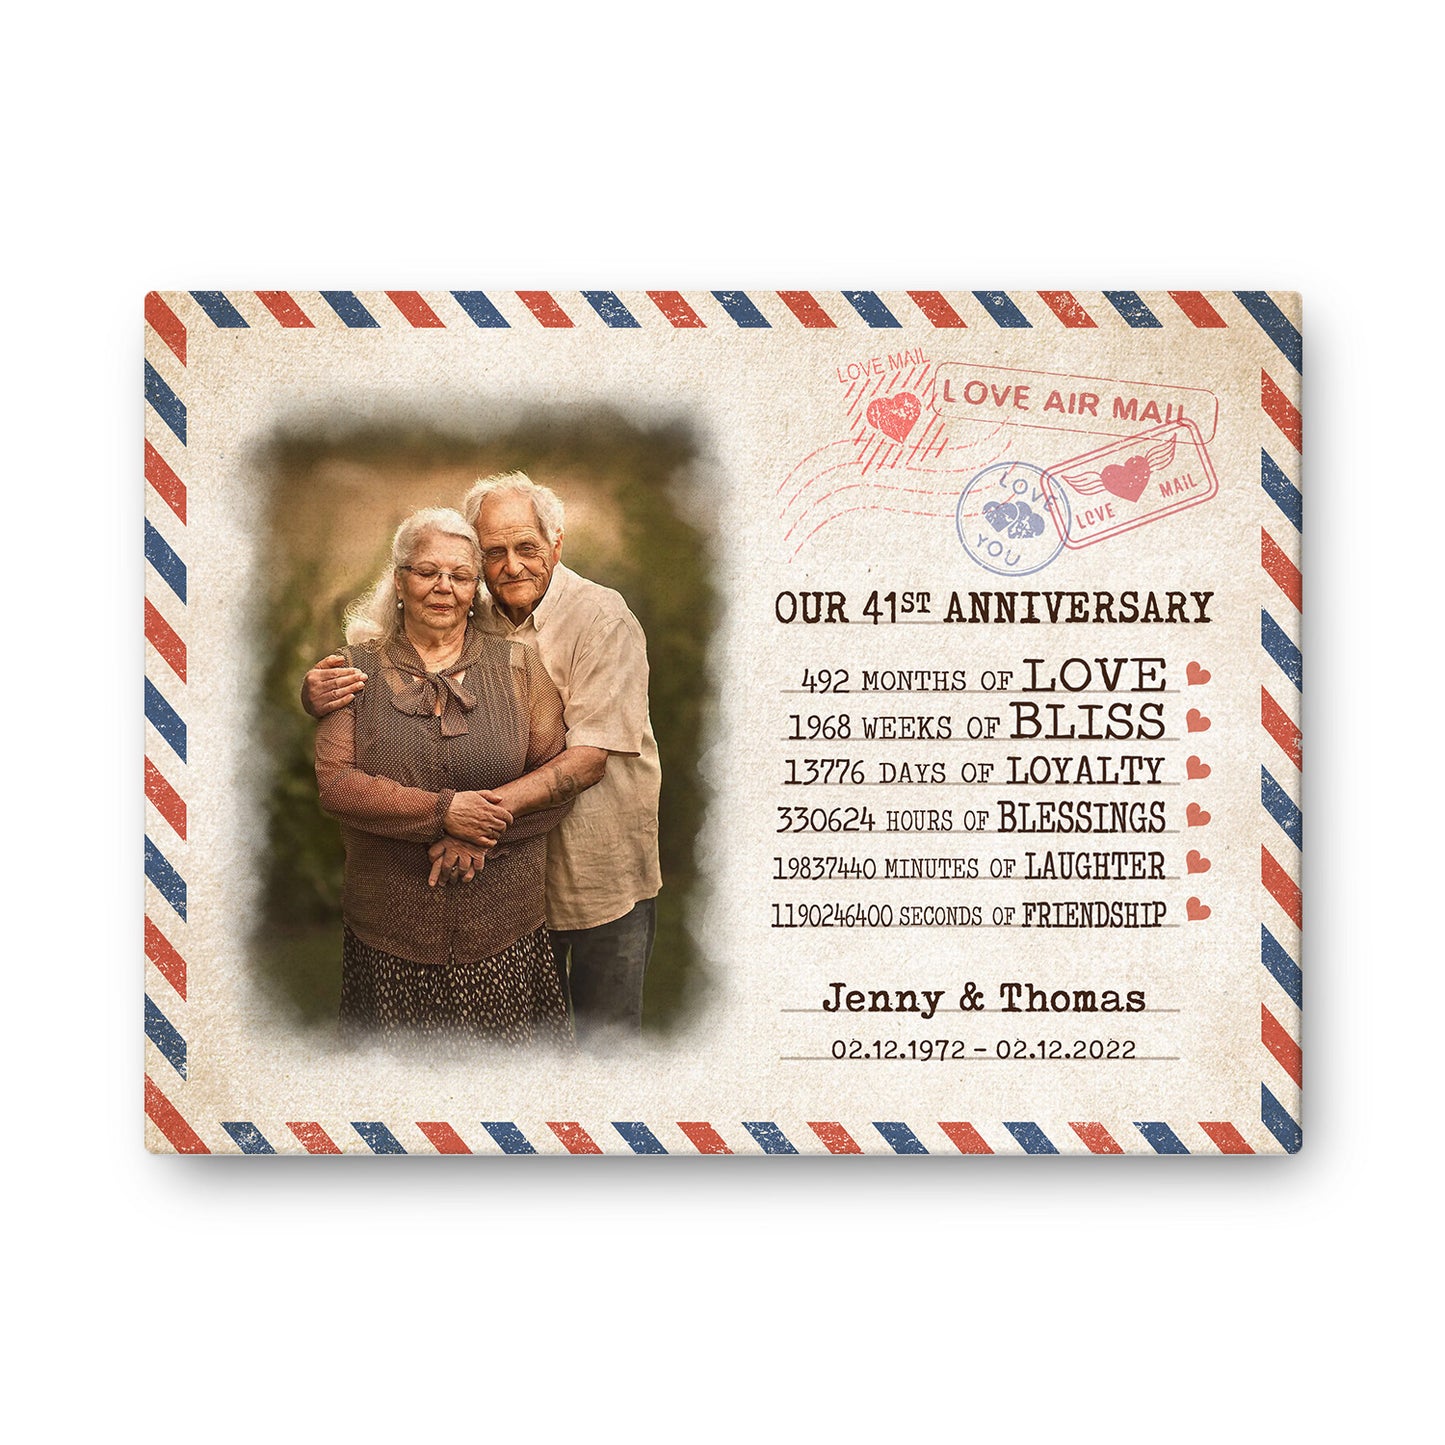 Our 41st Anniversary Letter Valentine Gift Personalized Canvas